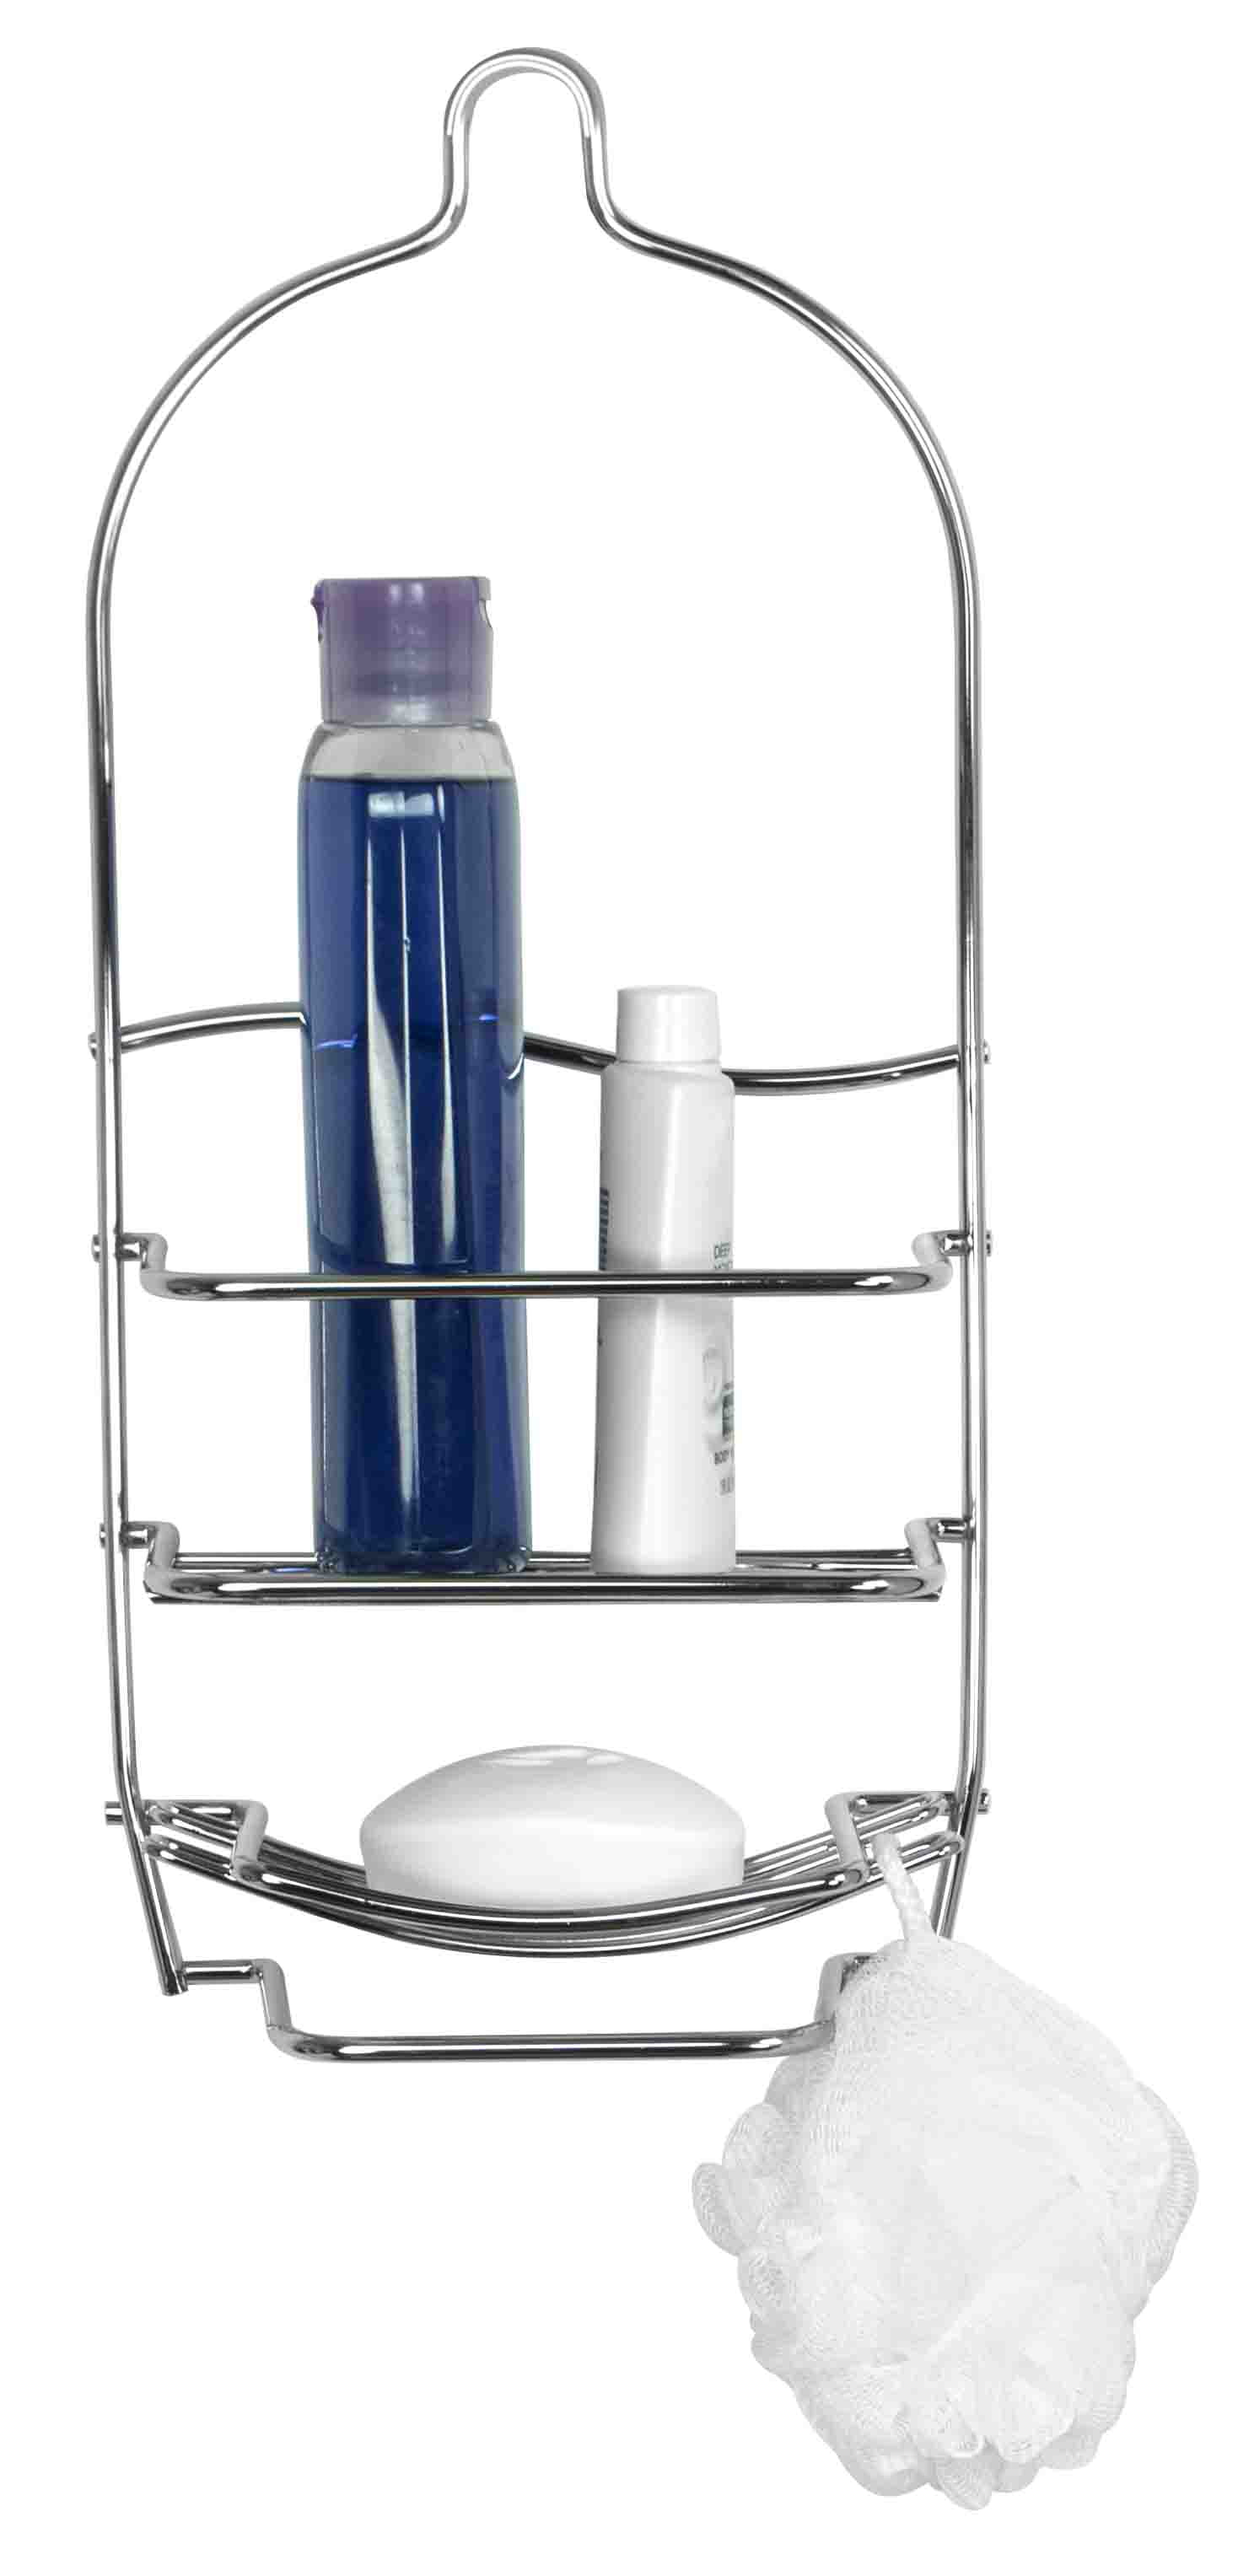 Home Basics NEW Silver Chrome Shower Caddy with Soap Dish SC10135 